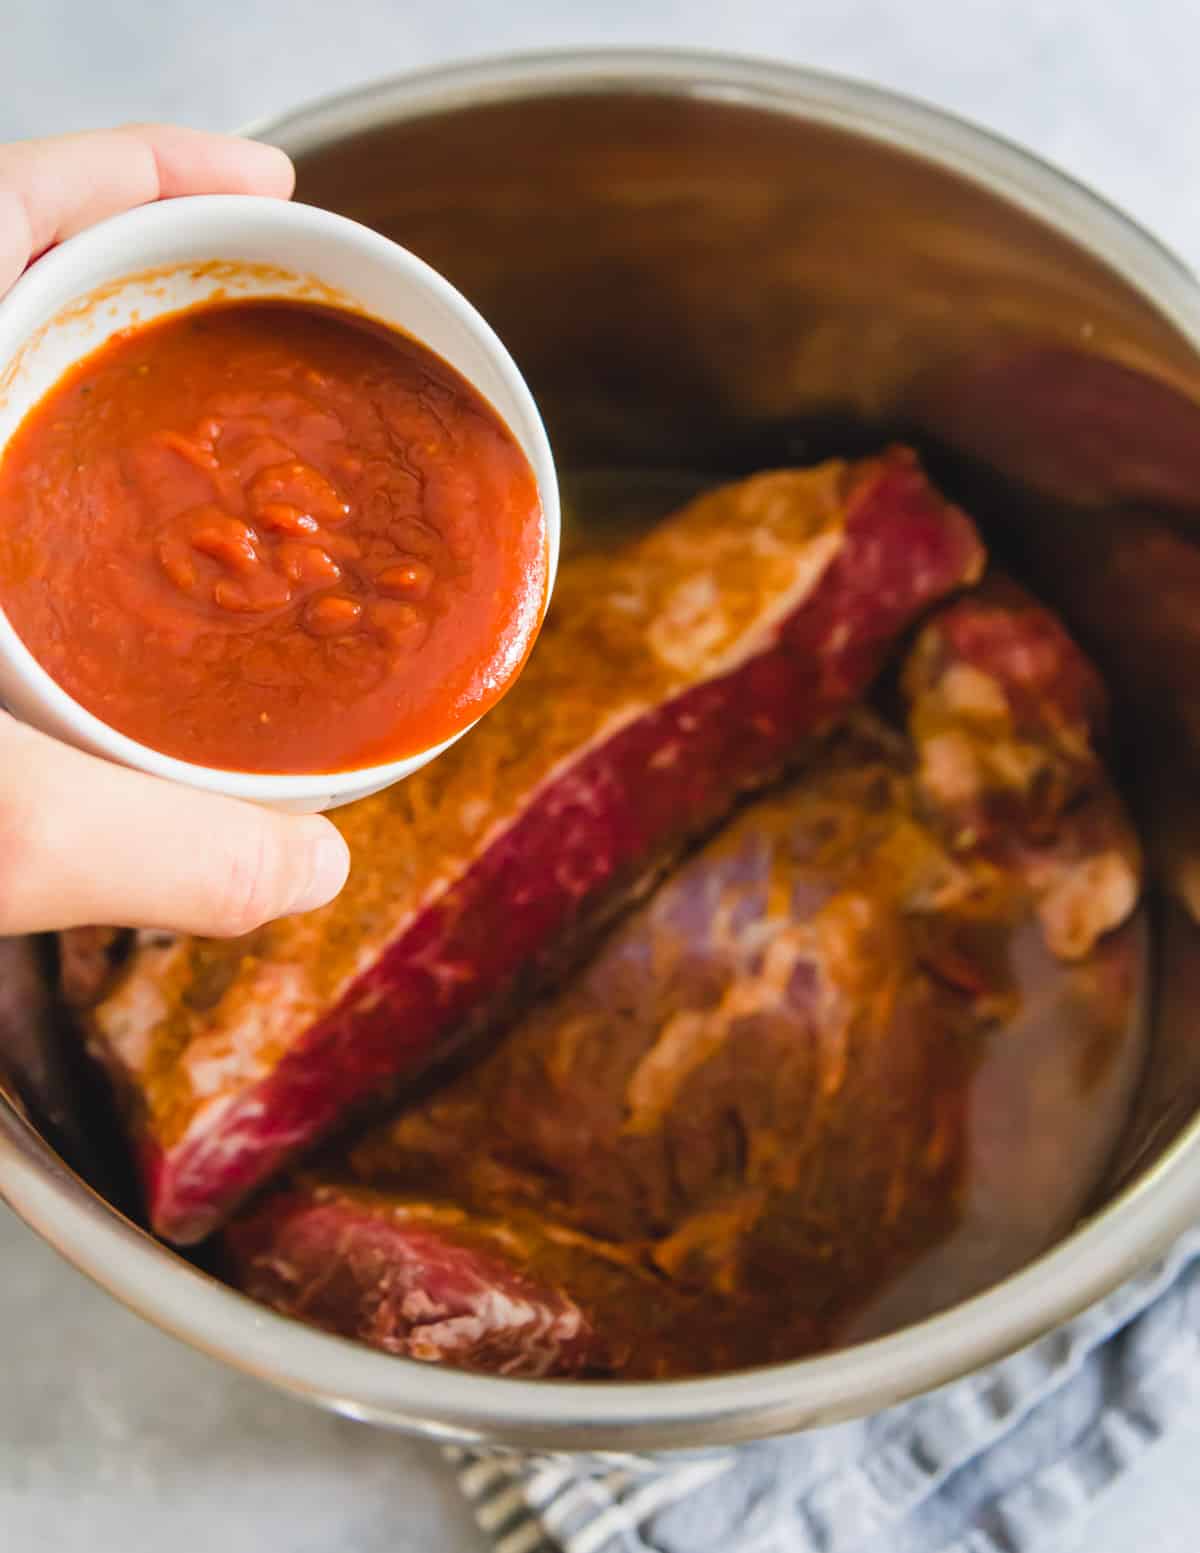 BBQ sauce is added to the Instant Pot on top of the brisket before cooking.